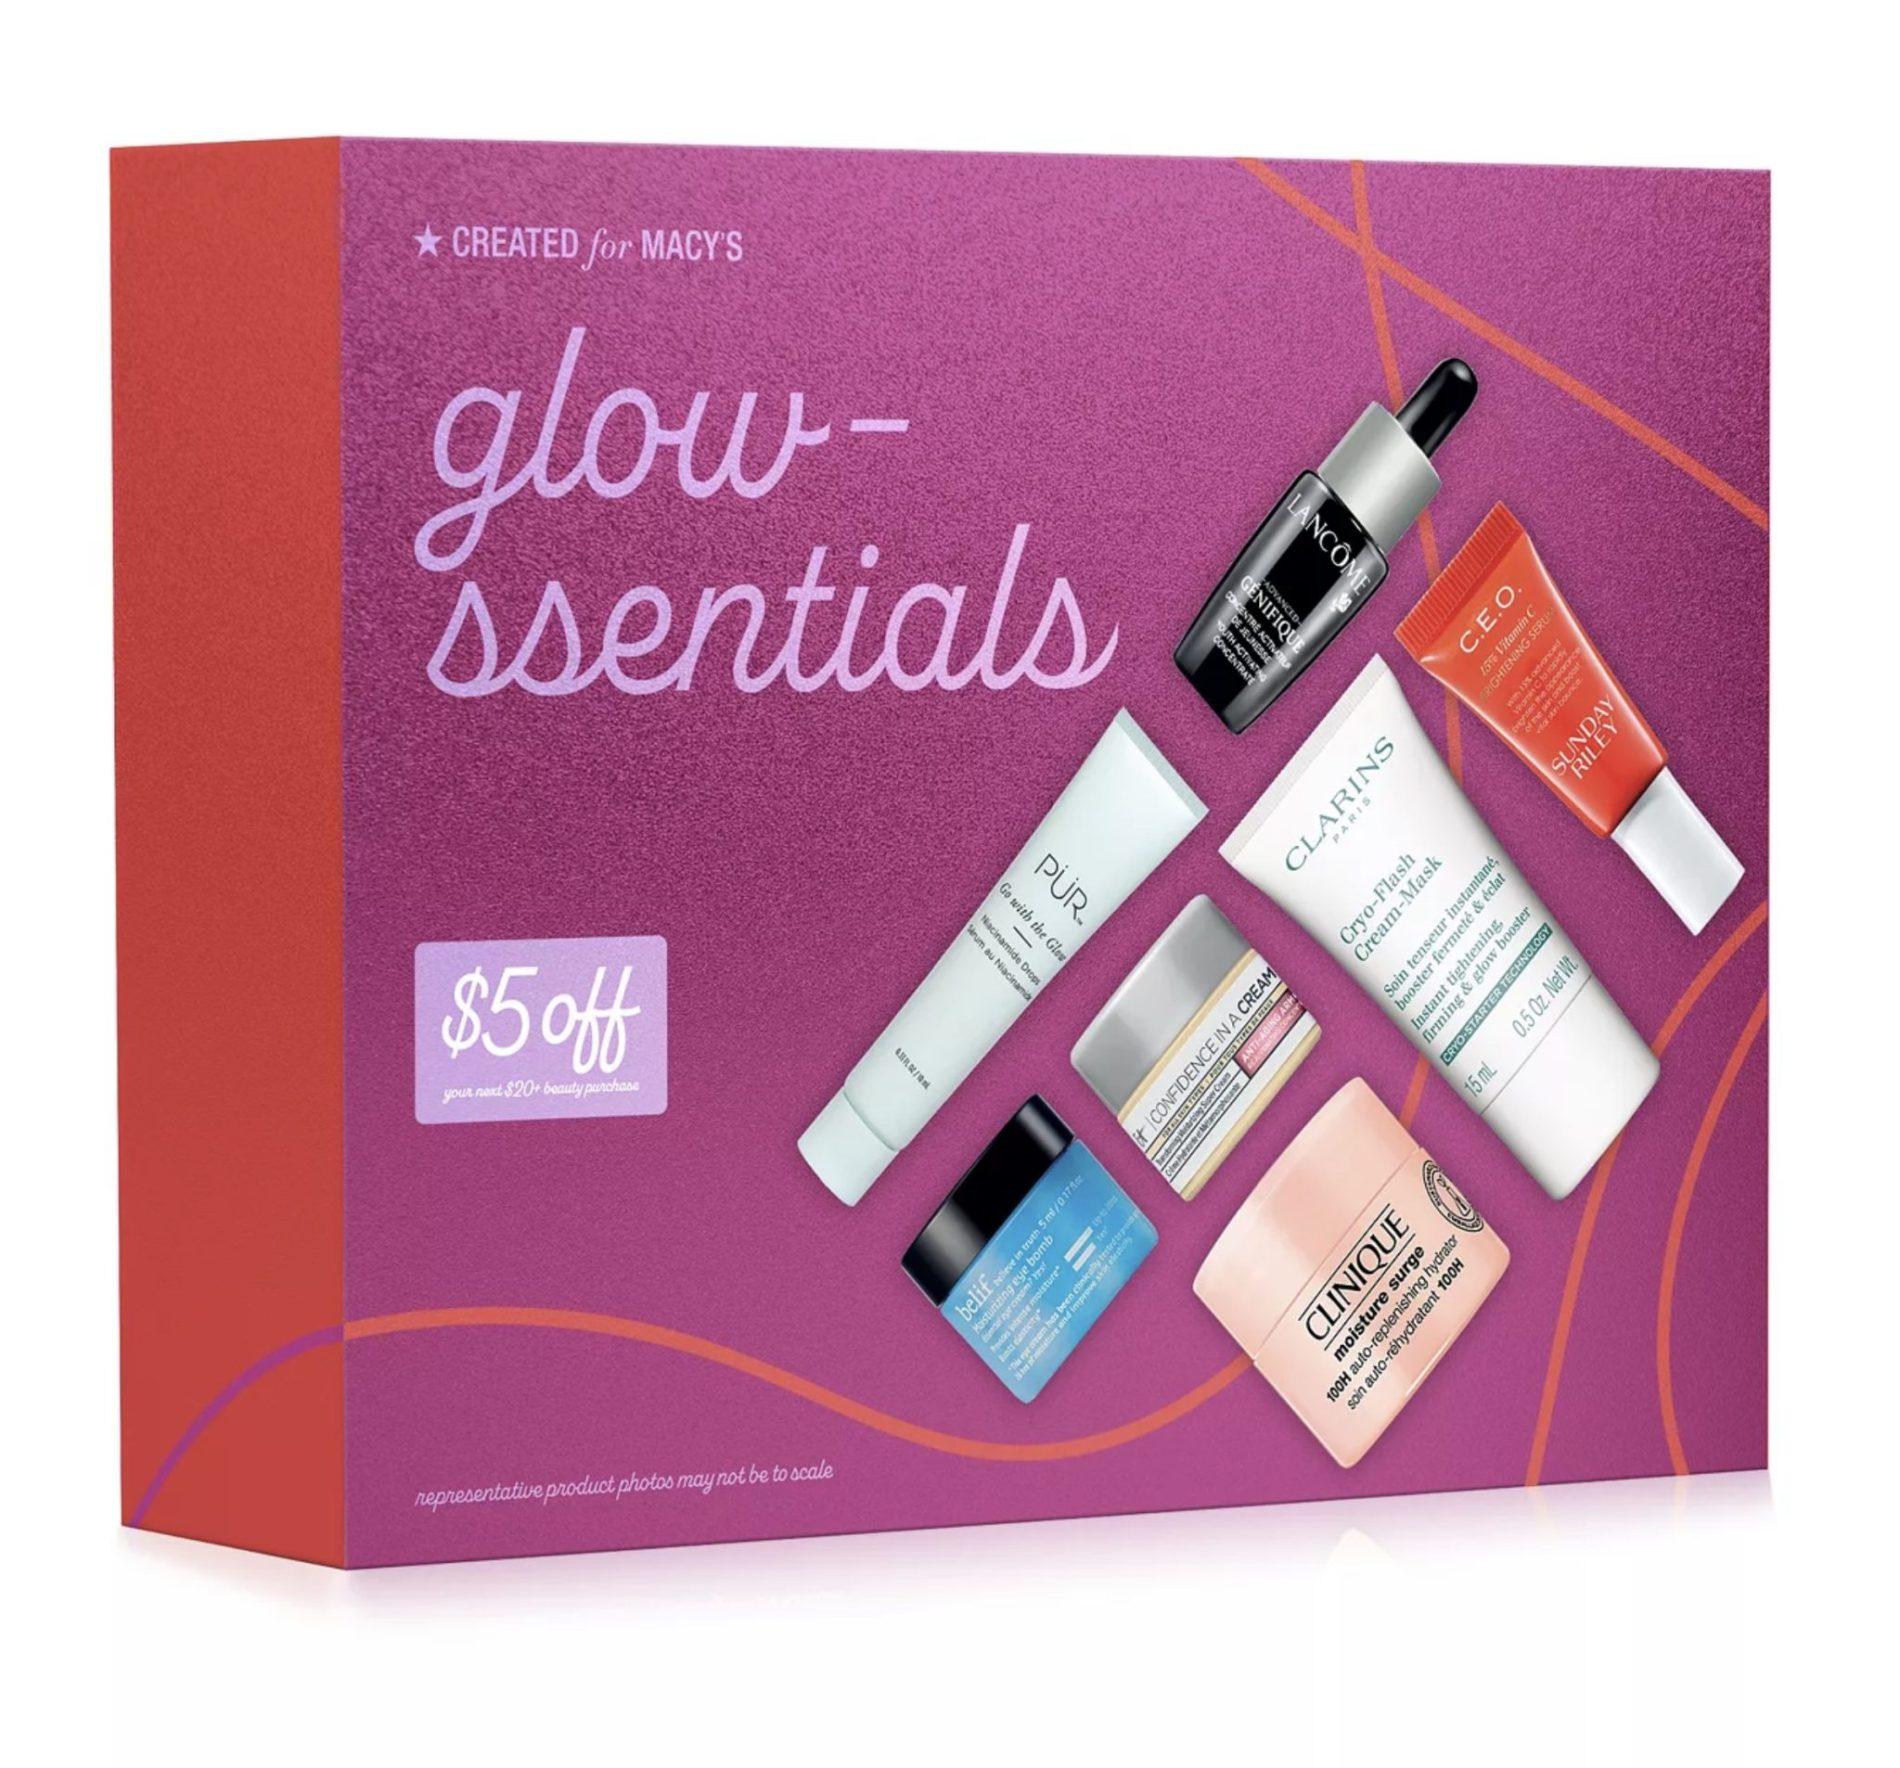 Read more about the article Created for Macy’s GLOWssentials Set